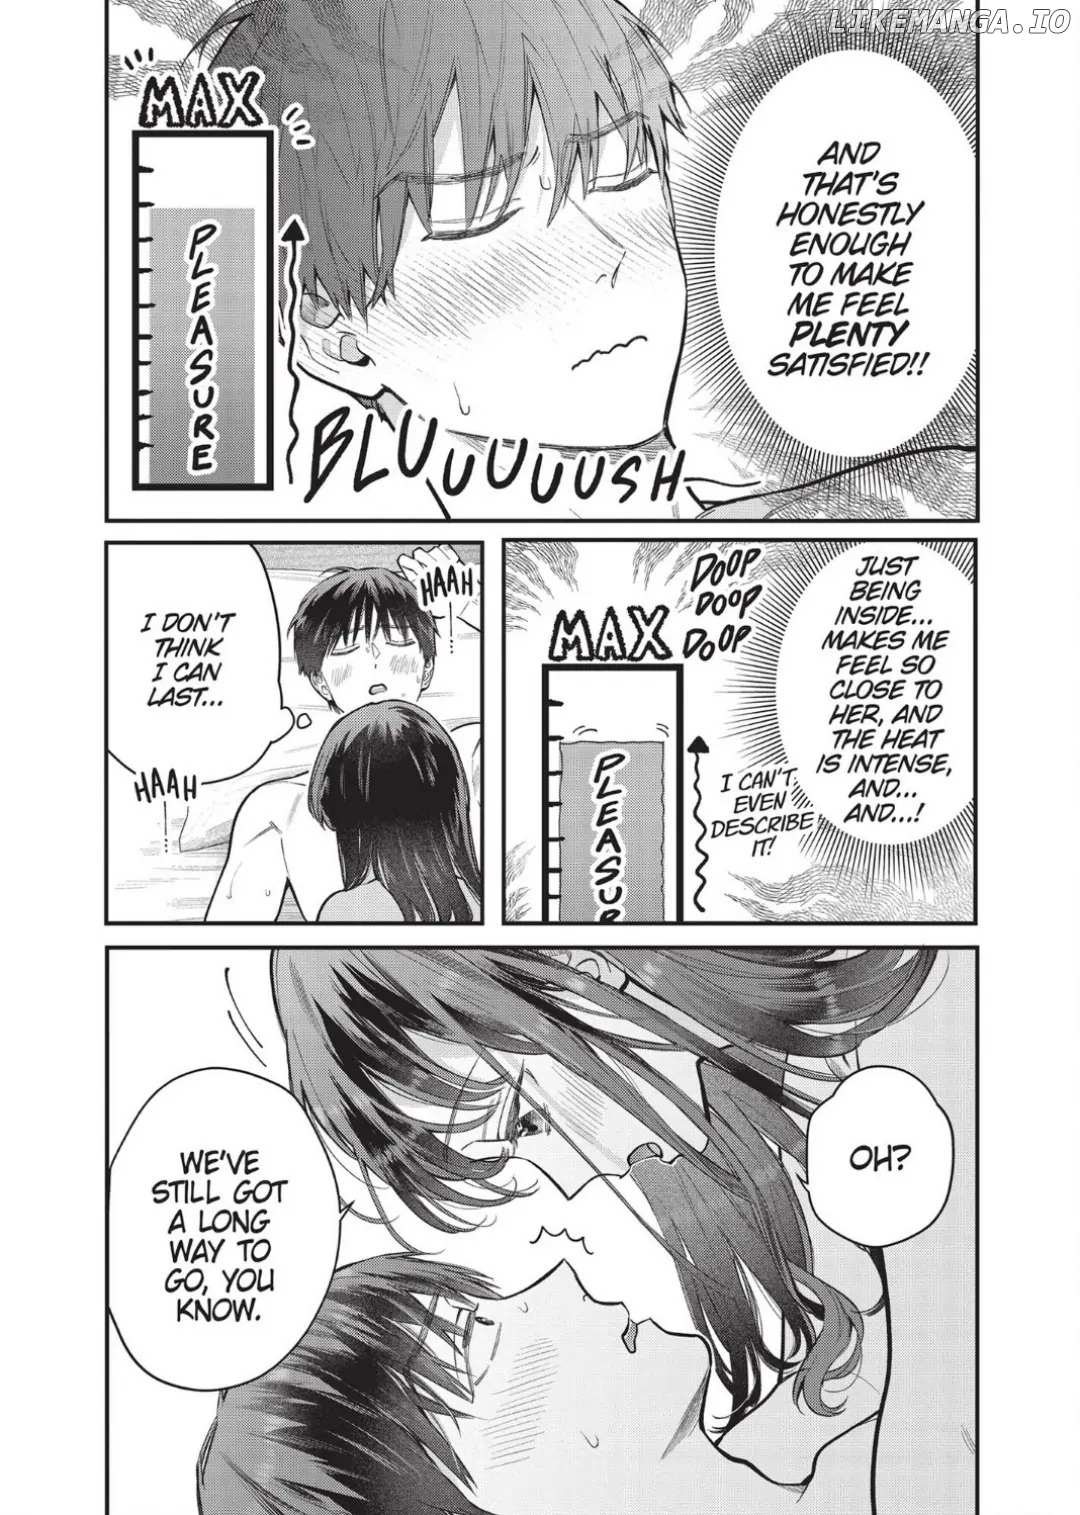 Is It Wrong To Get Done By A Girl? - 27 page 4-3911e670